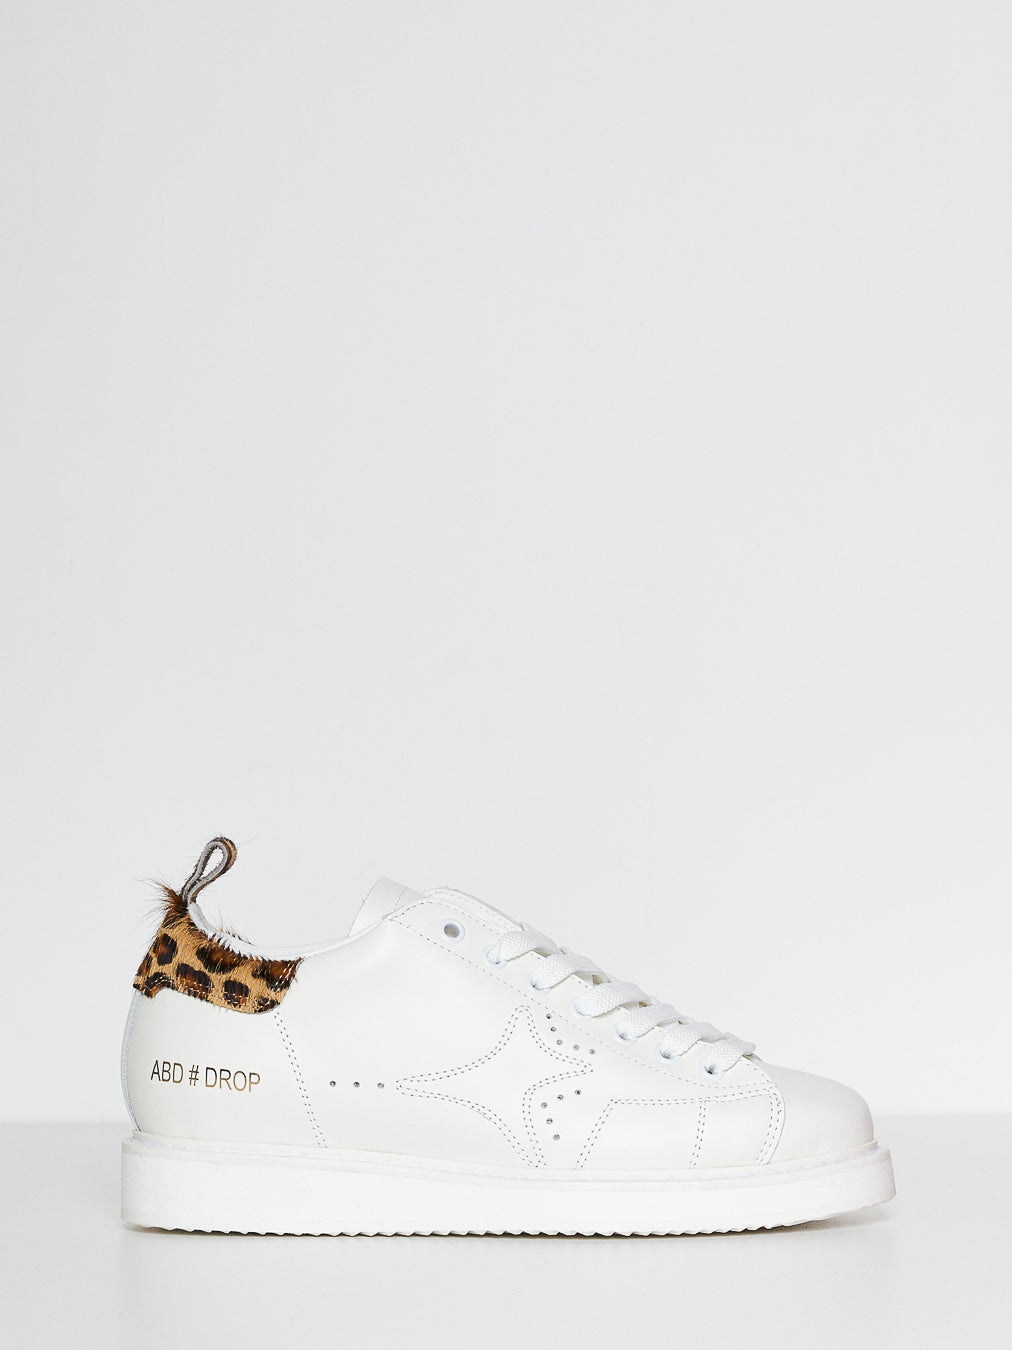 Ama Brand 2535 white sneakers in spotted tab leather